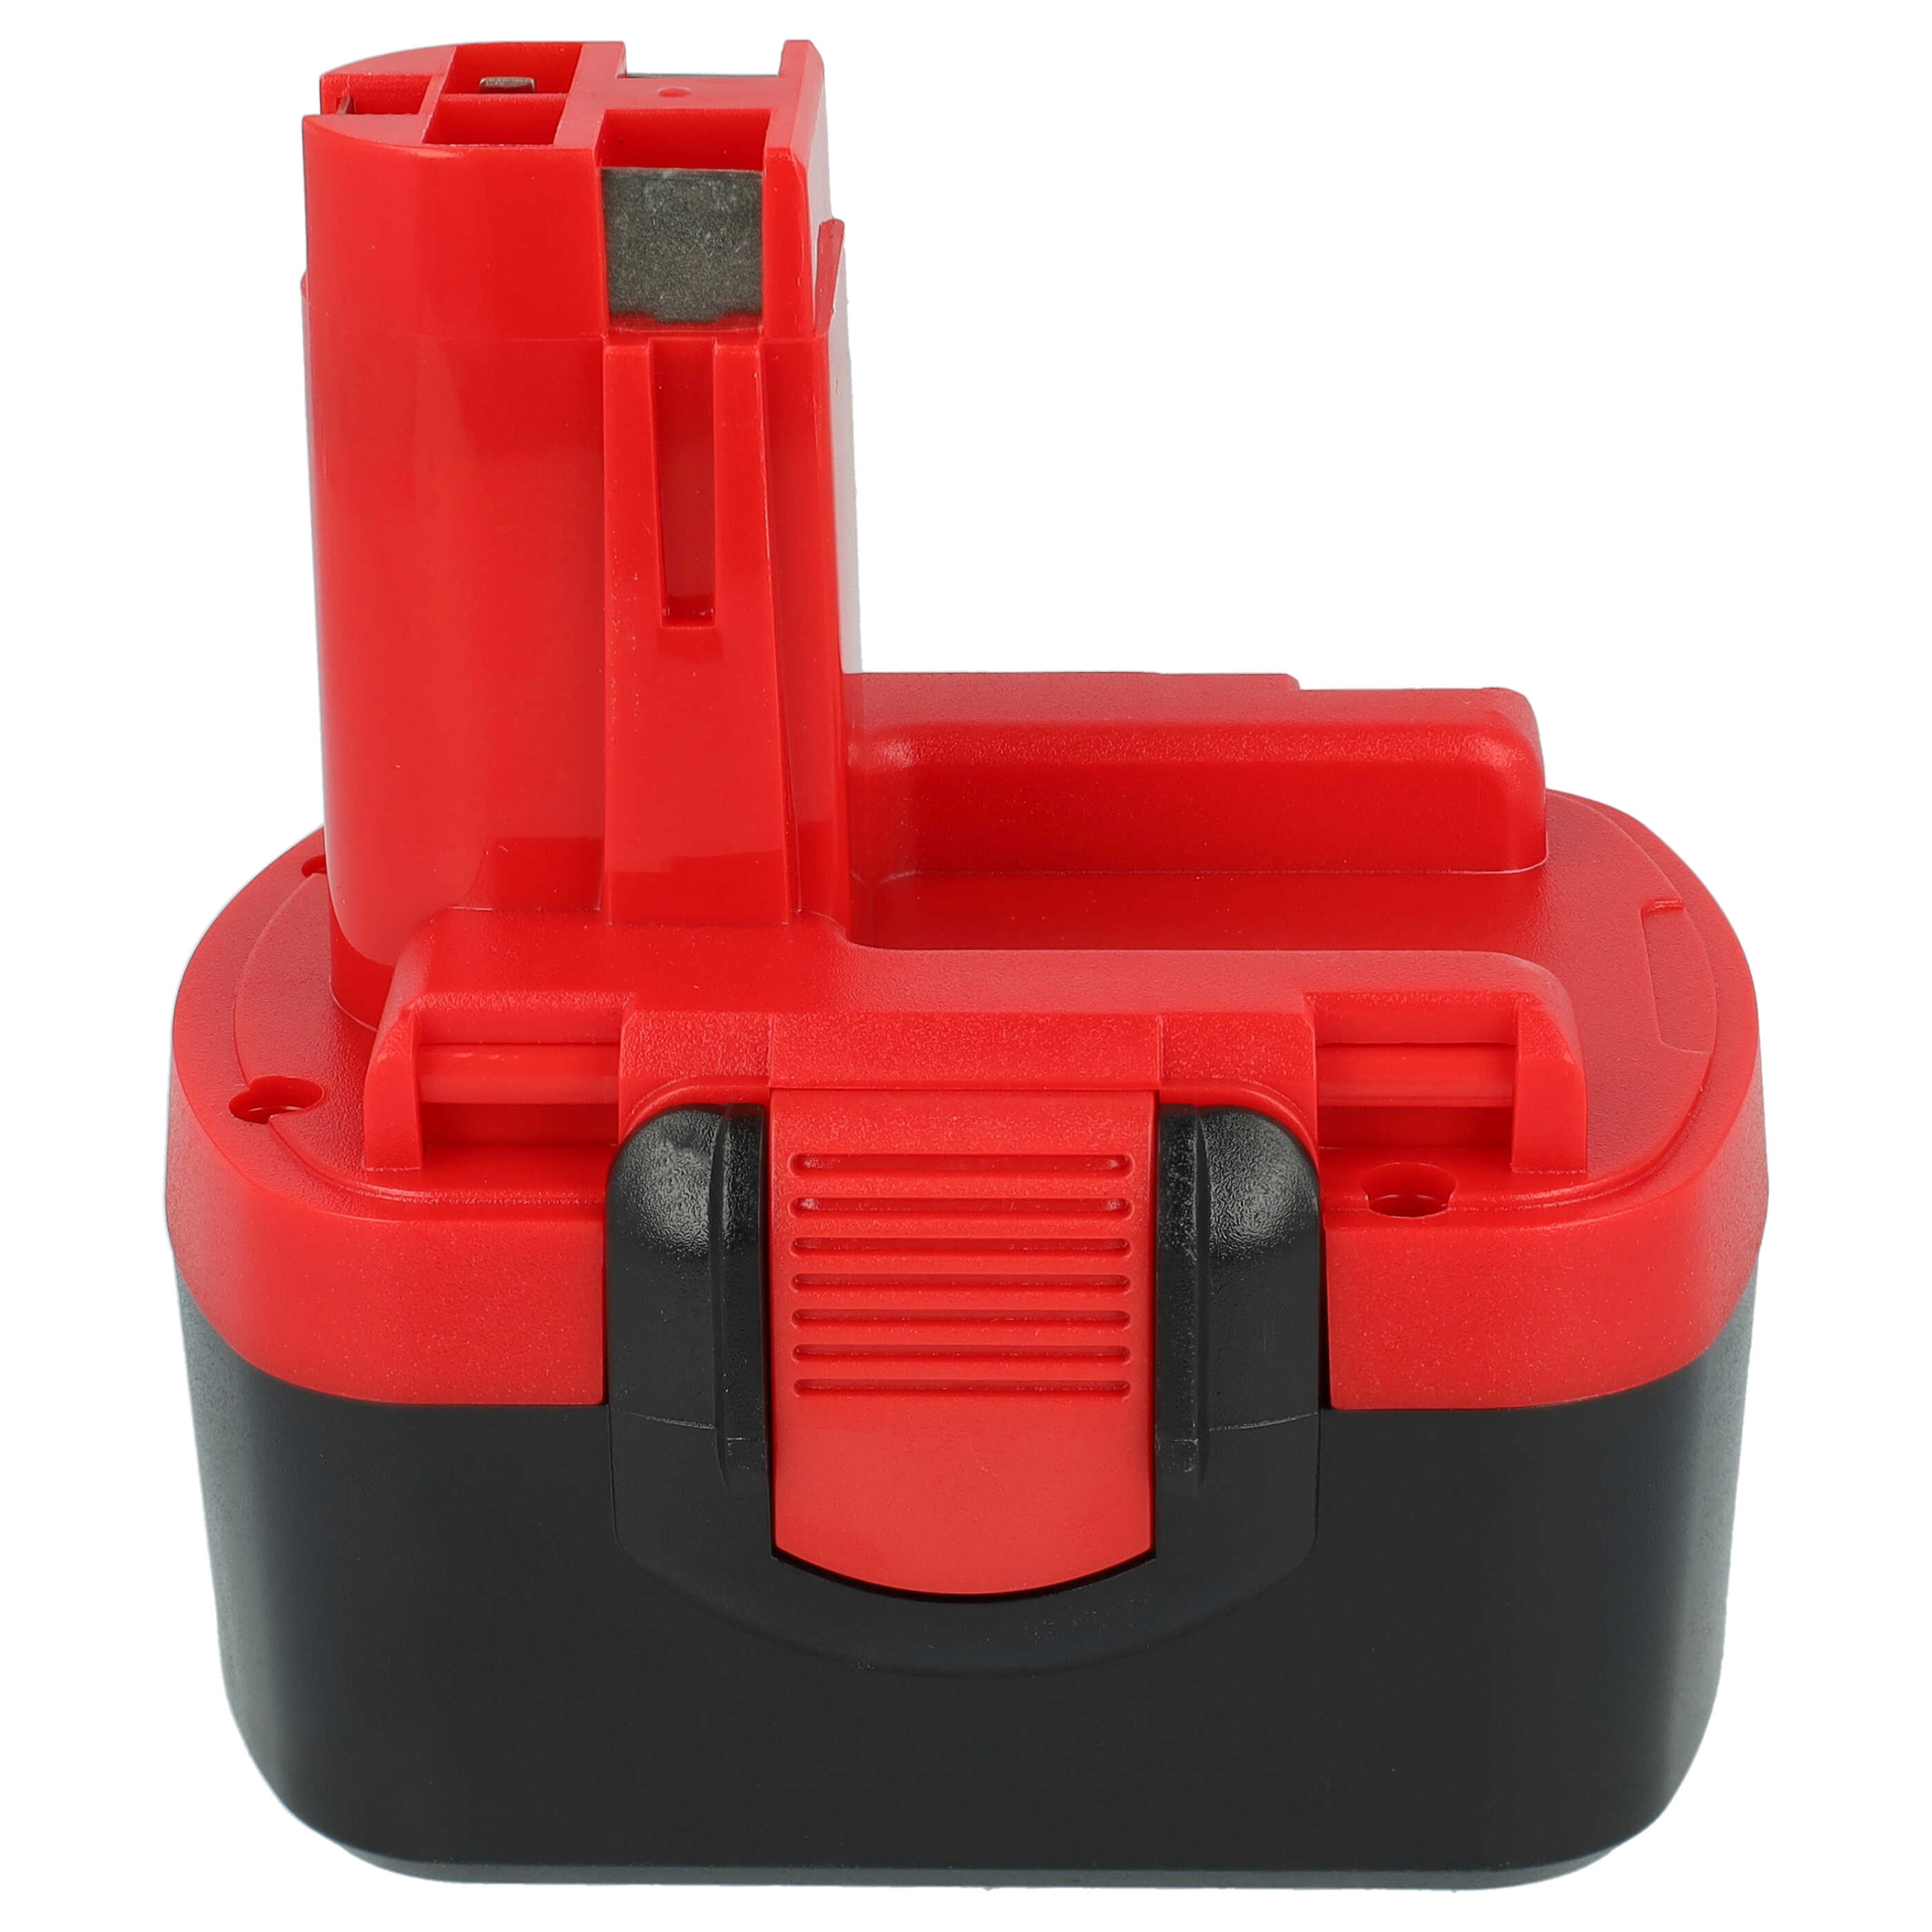 Electric Power Tool Battery Replaces Bosch 2 607 335 264, 2 607 335 263, 1617S0004W - 2500 mAh, 14.4 V, NiMH